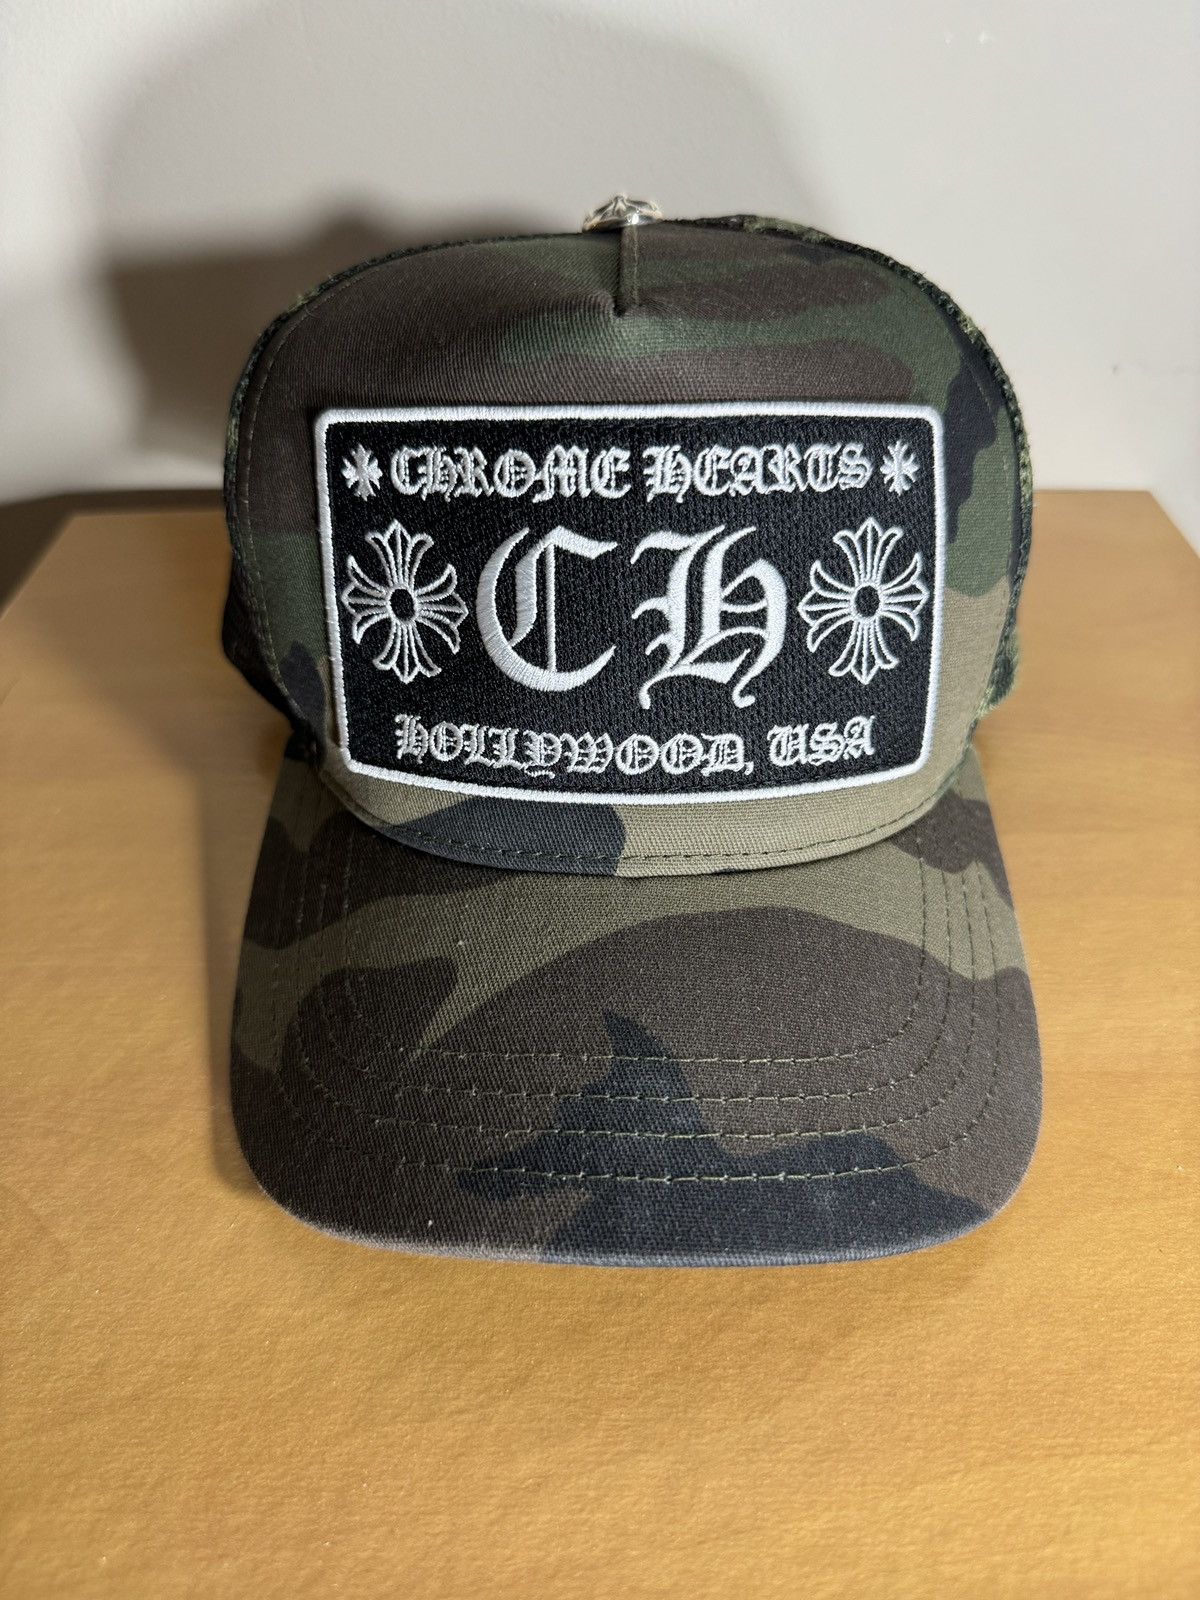 Pre-owned Chrome Hearts Camo Trucker Hat New